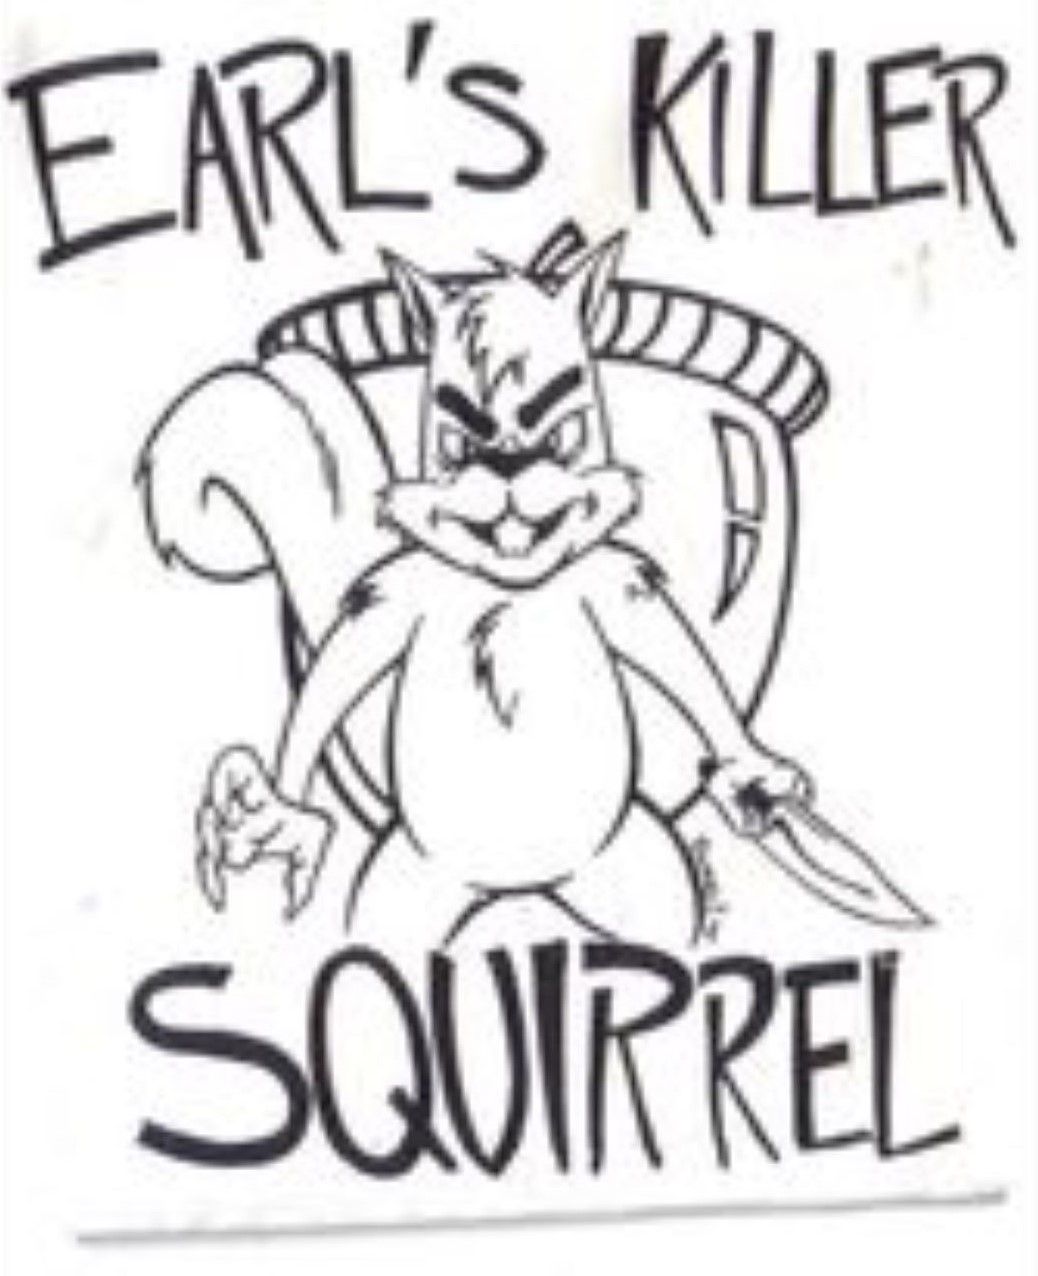 This is: Earl's Killer Squirrel